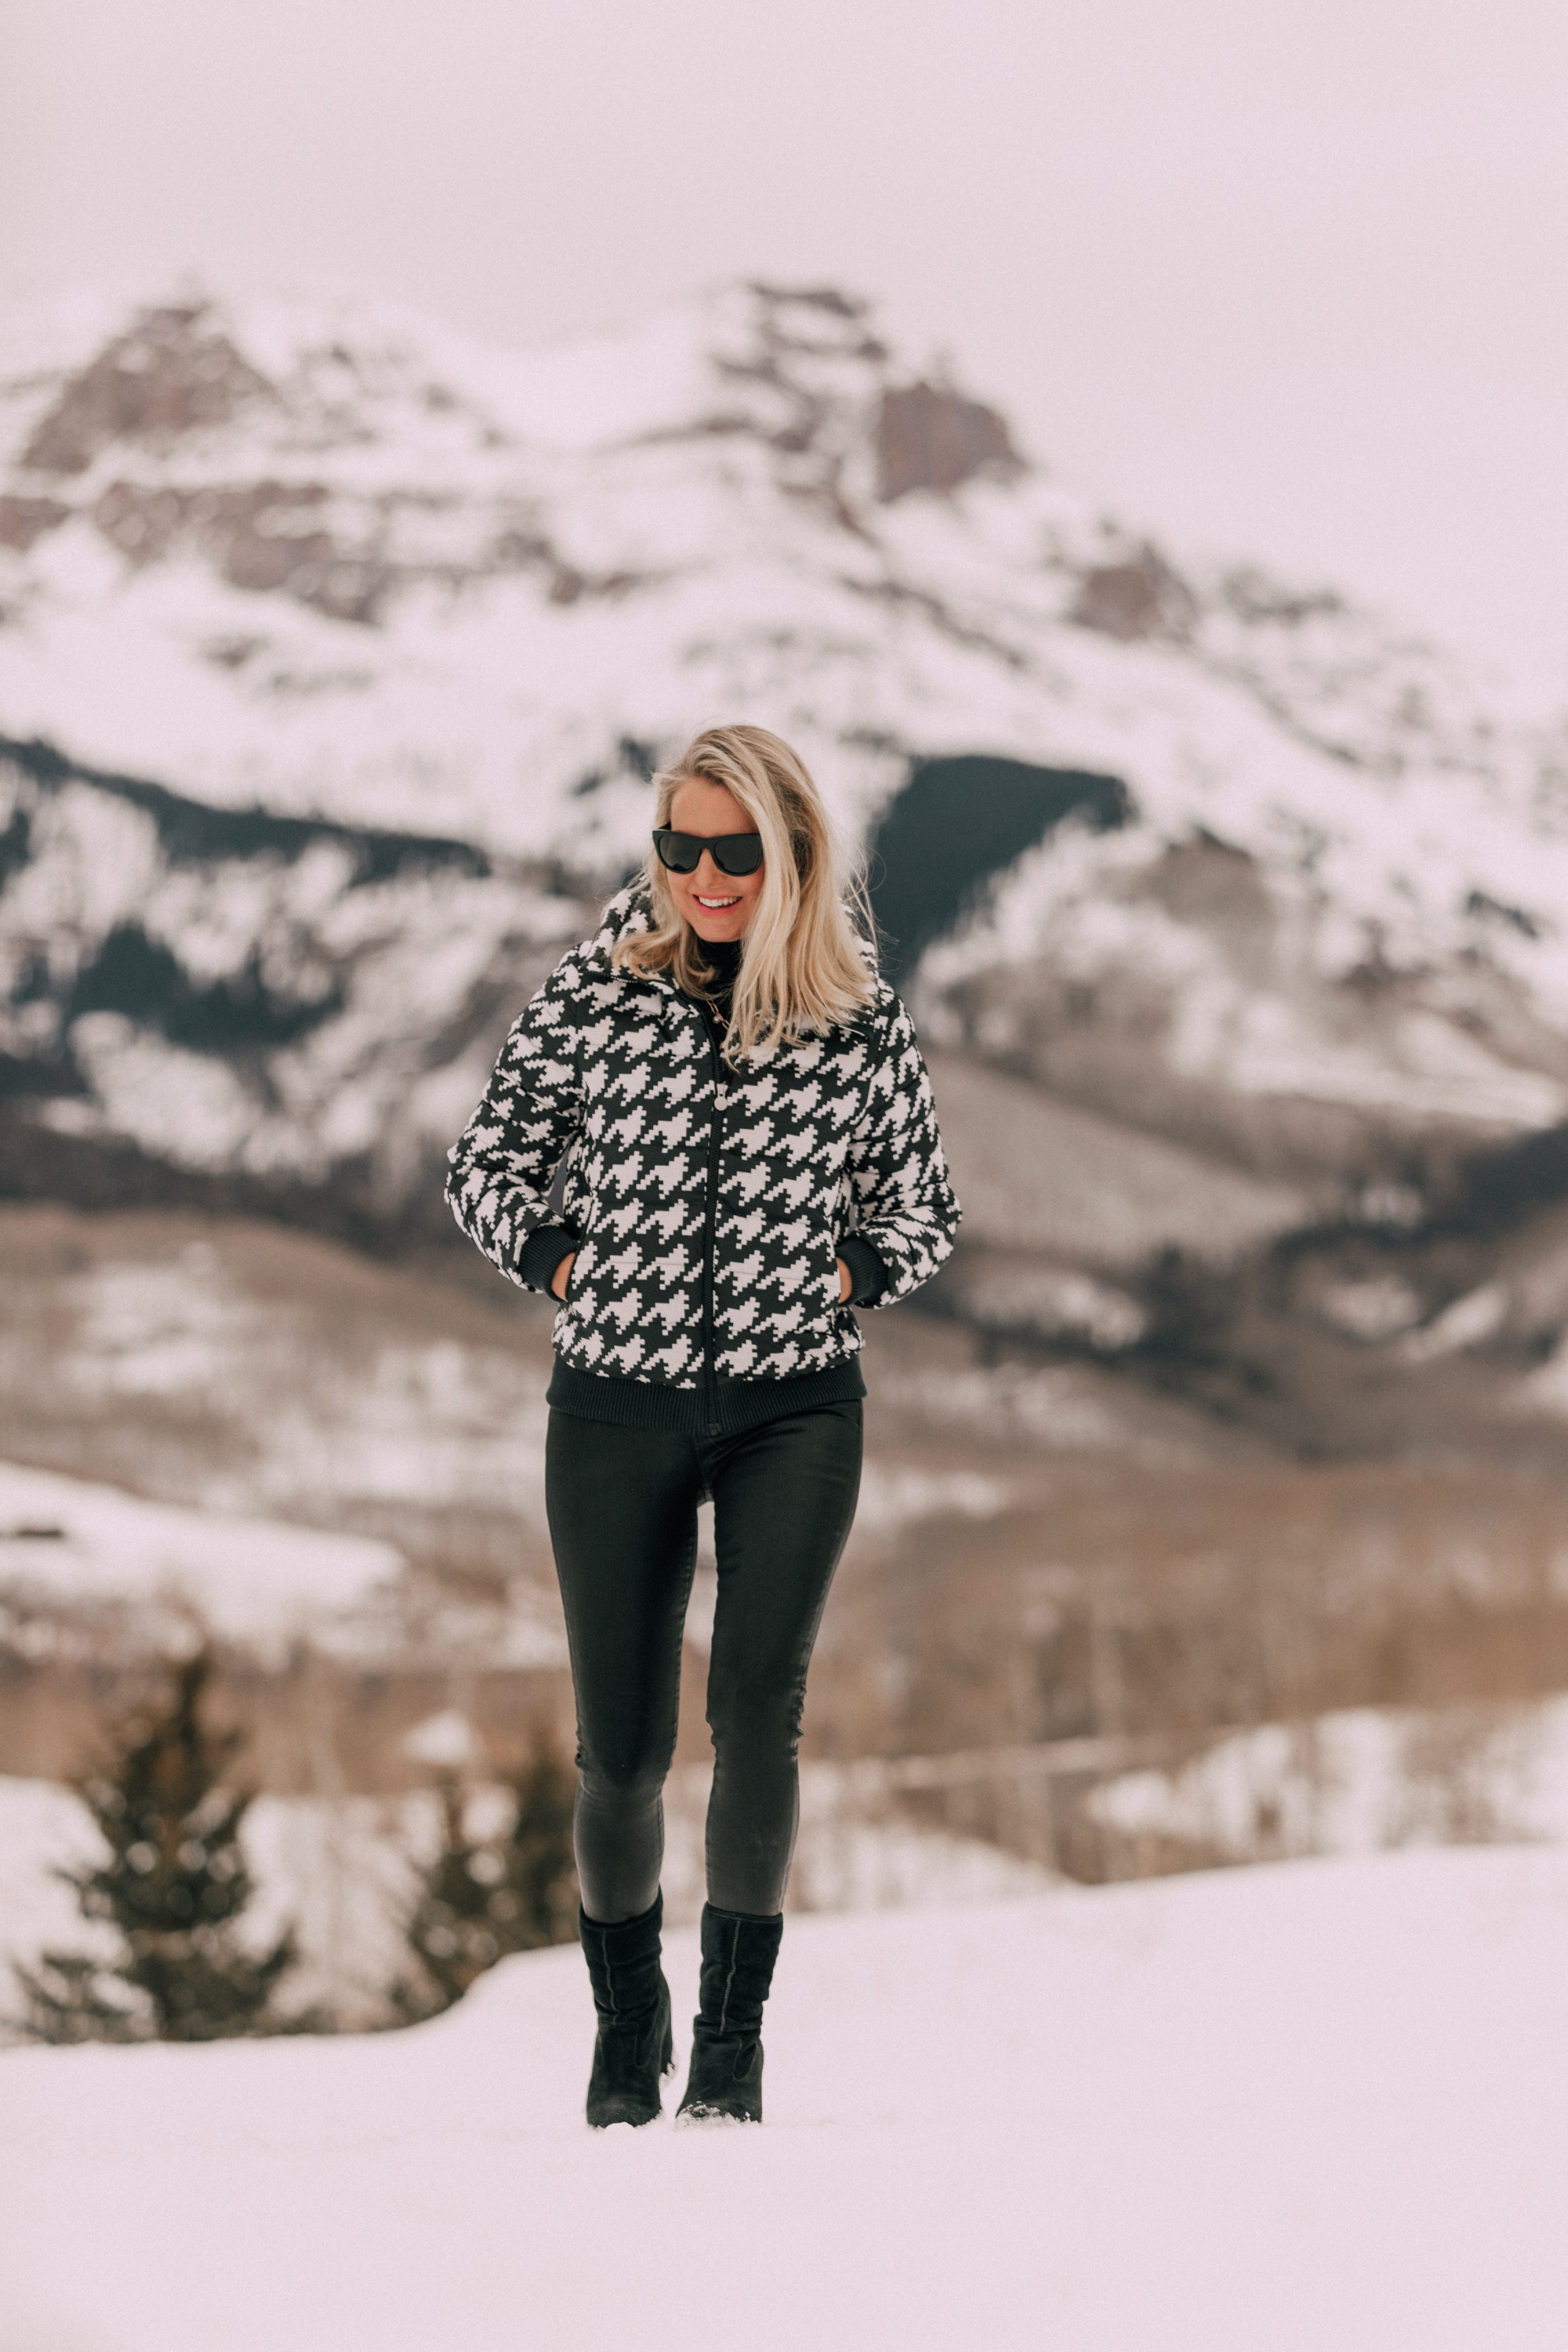 3 Winter Fashion Trends You Have To Try - The Thunderbird